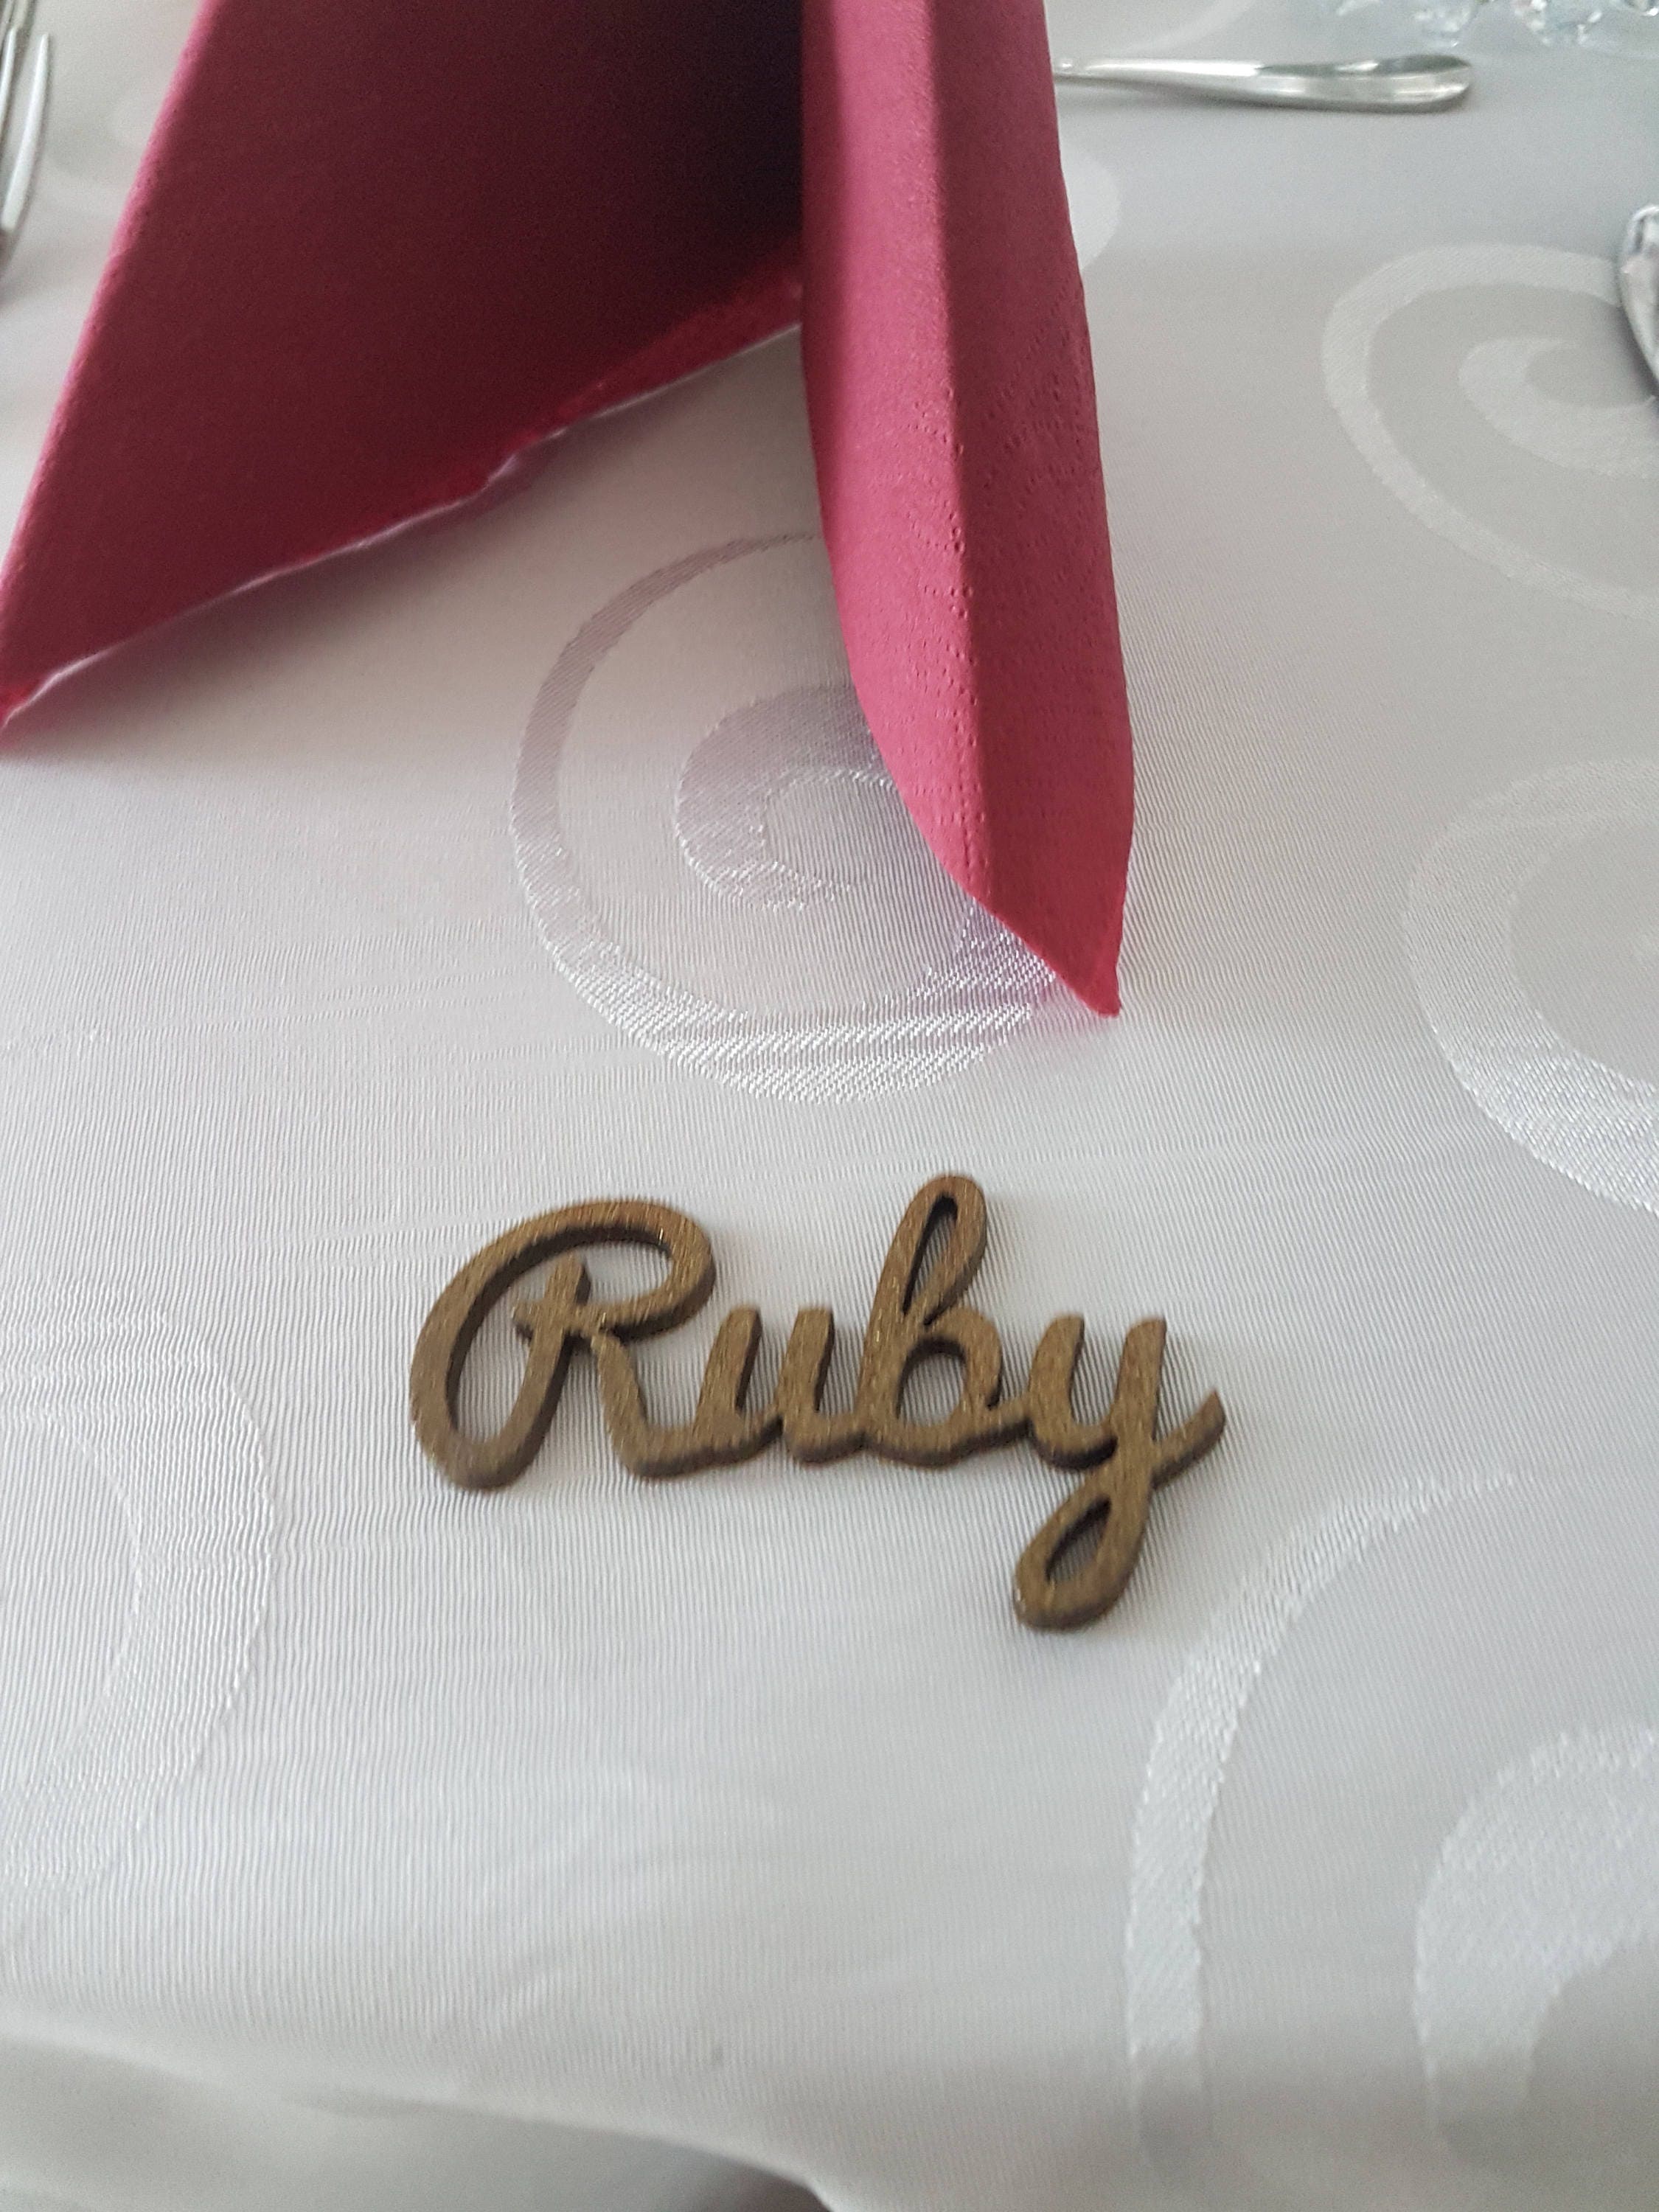 Script Style Wedding/Party Table Place Names/Favours/Placeholders Laser Cut from 3.2mm MDF